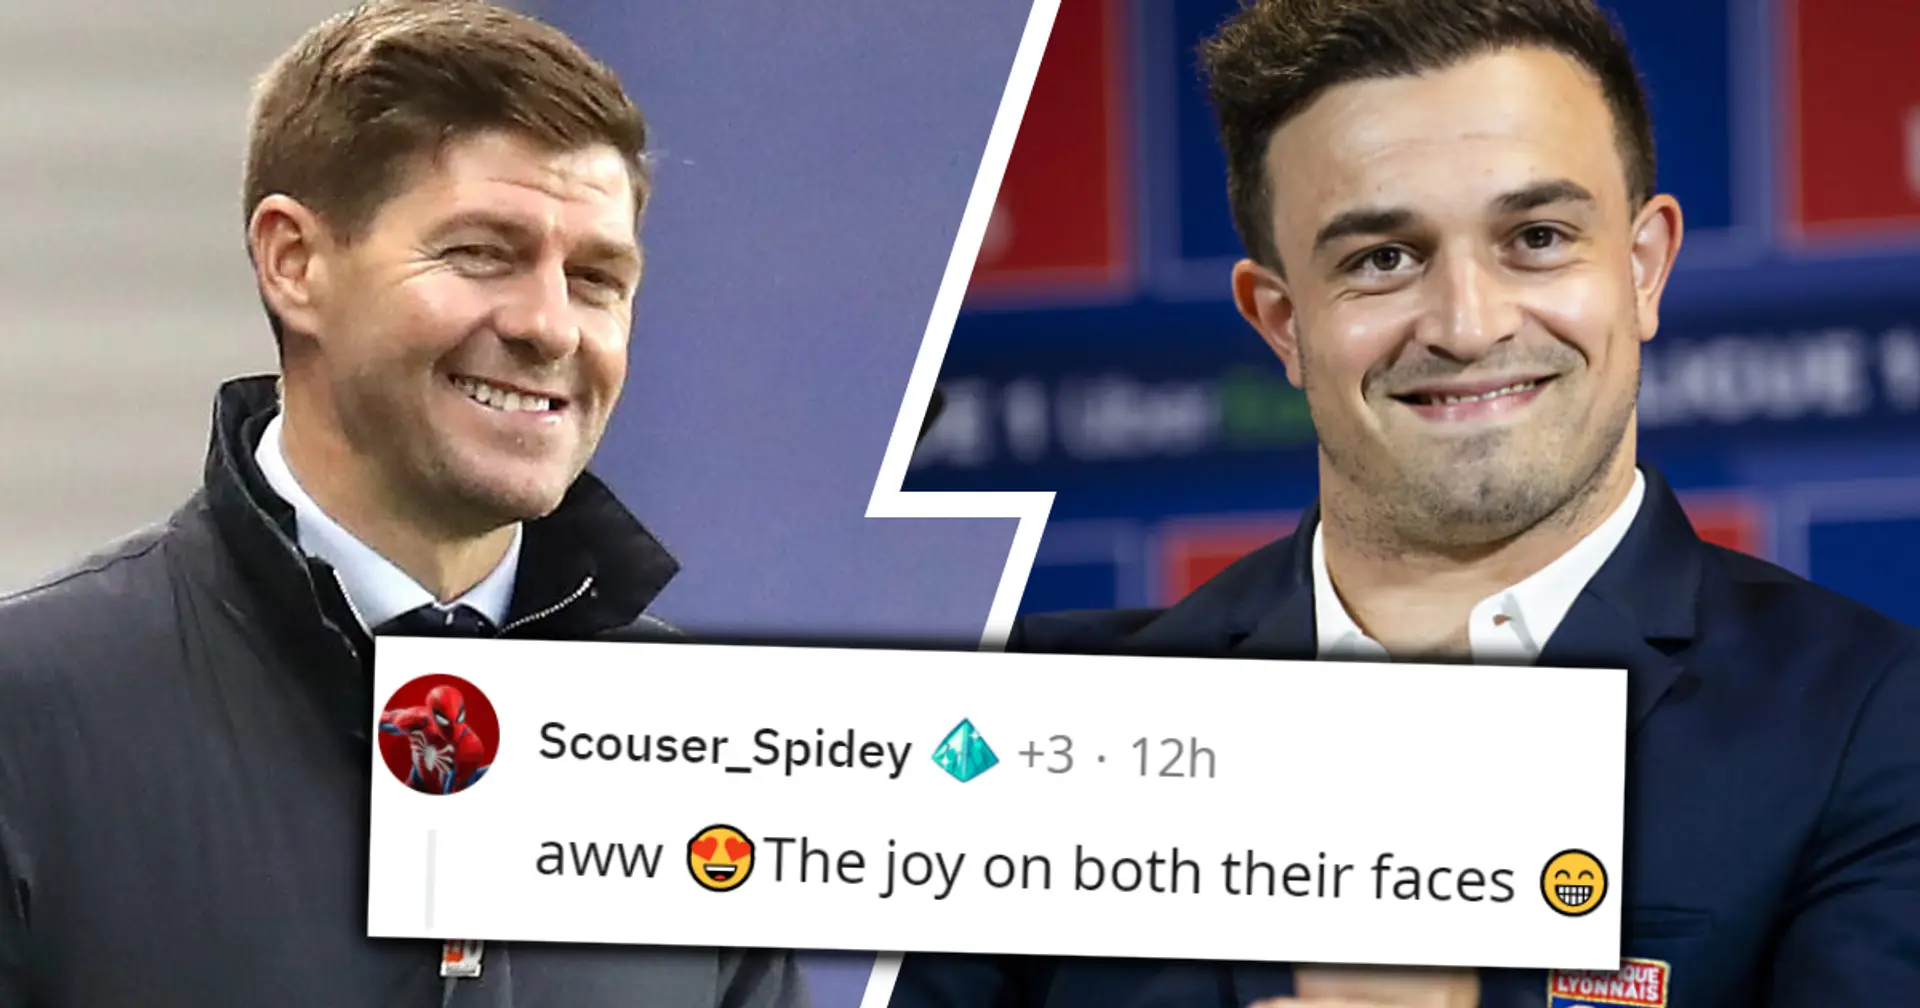 'What could be better': LFC fans spot wholesome moment between Gerrard and Shaqiri